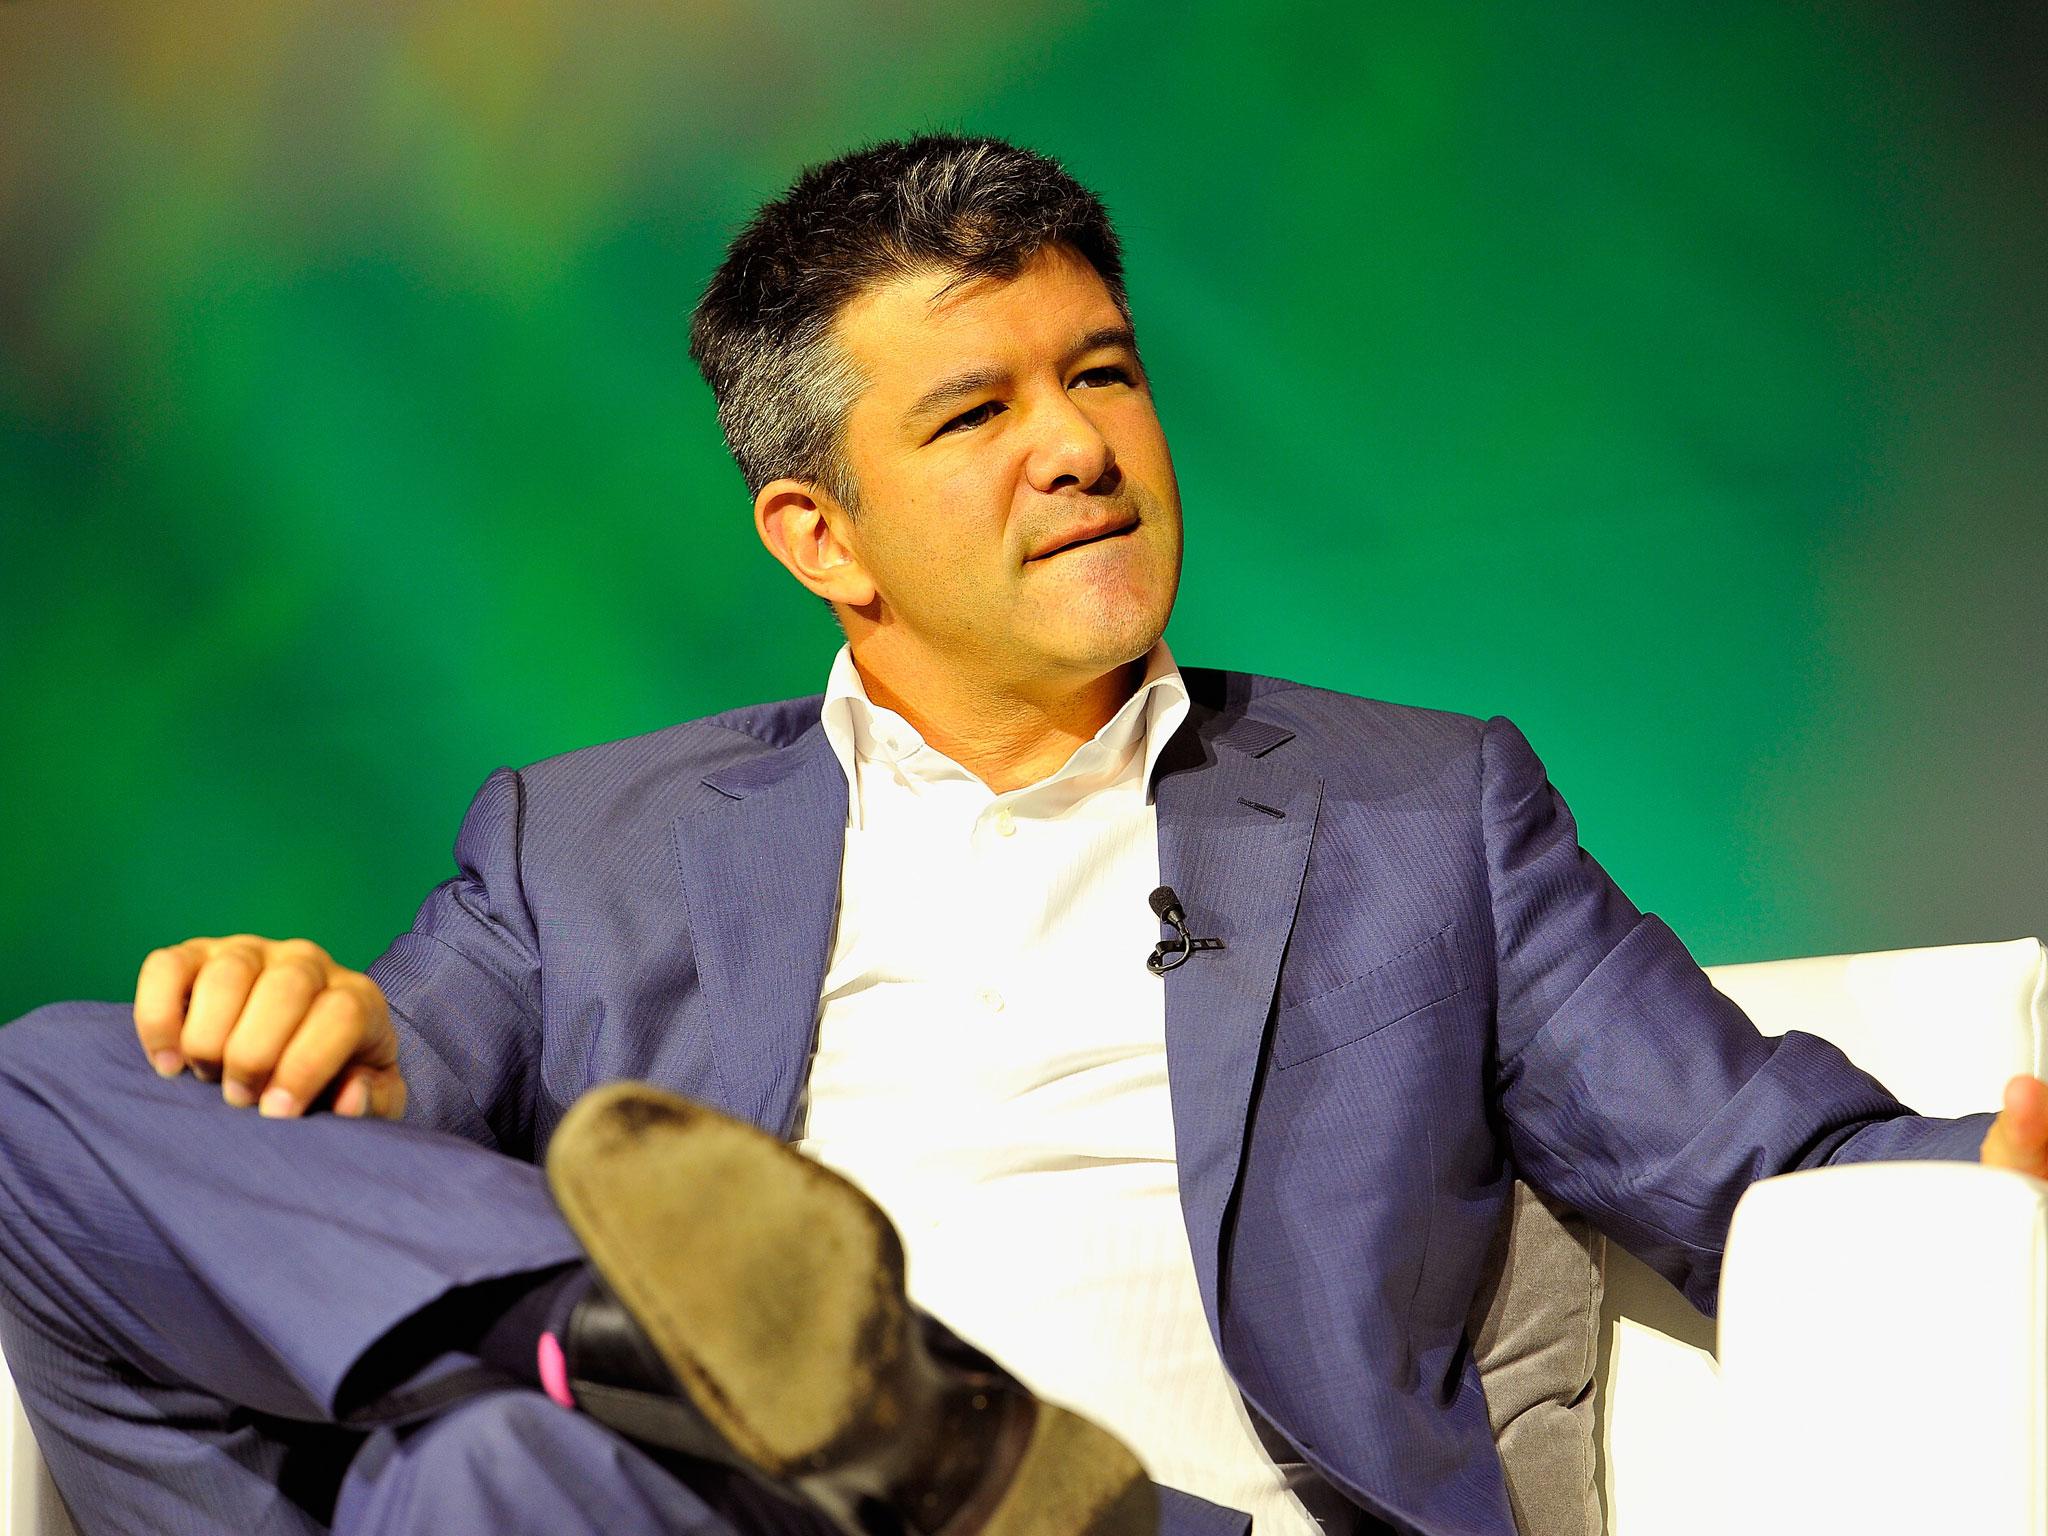 The petition reportedly calls for the board to bring Mr Kalanick back in an operational role, although it does not demand that he is reinstated as CEO